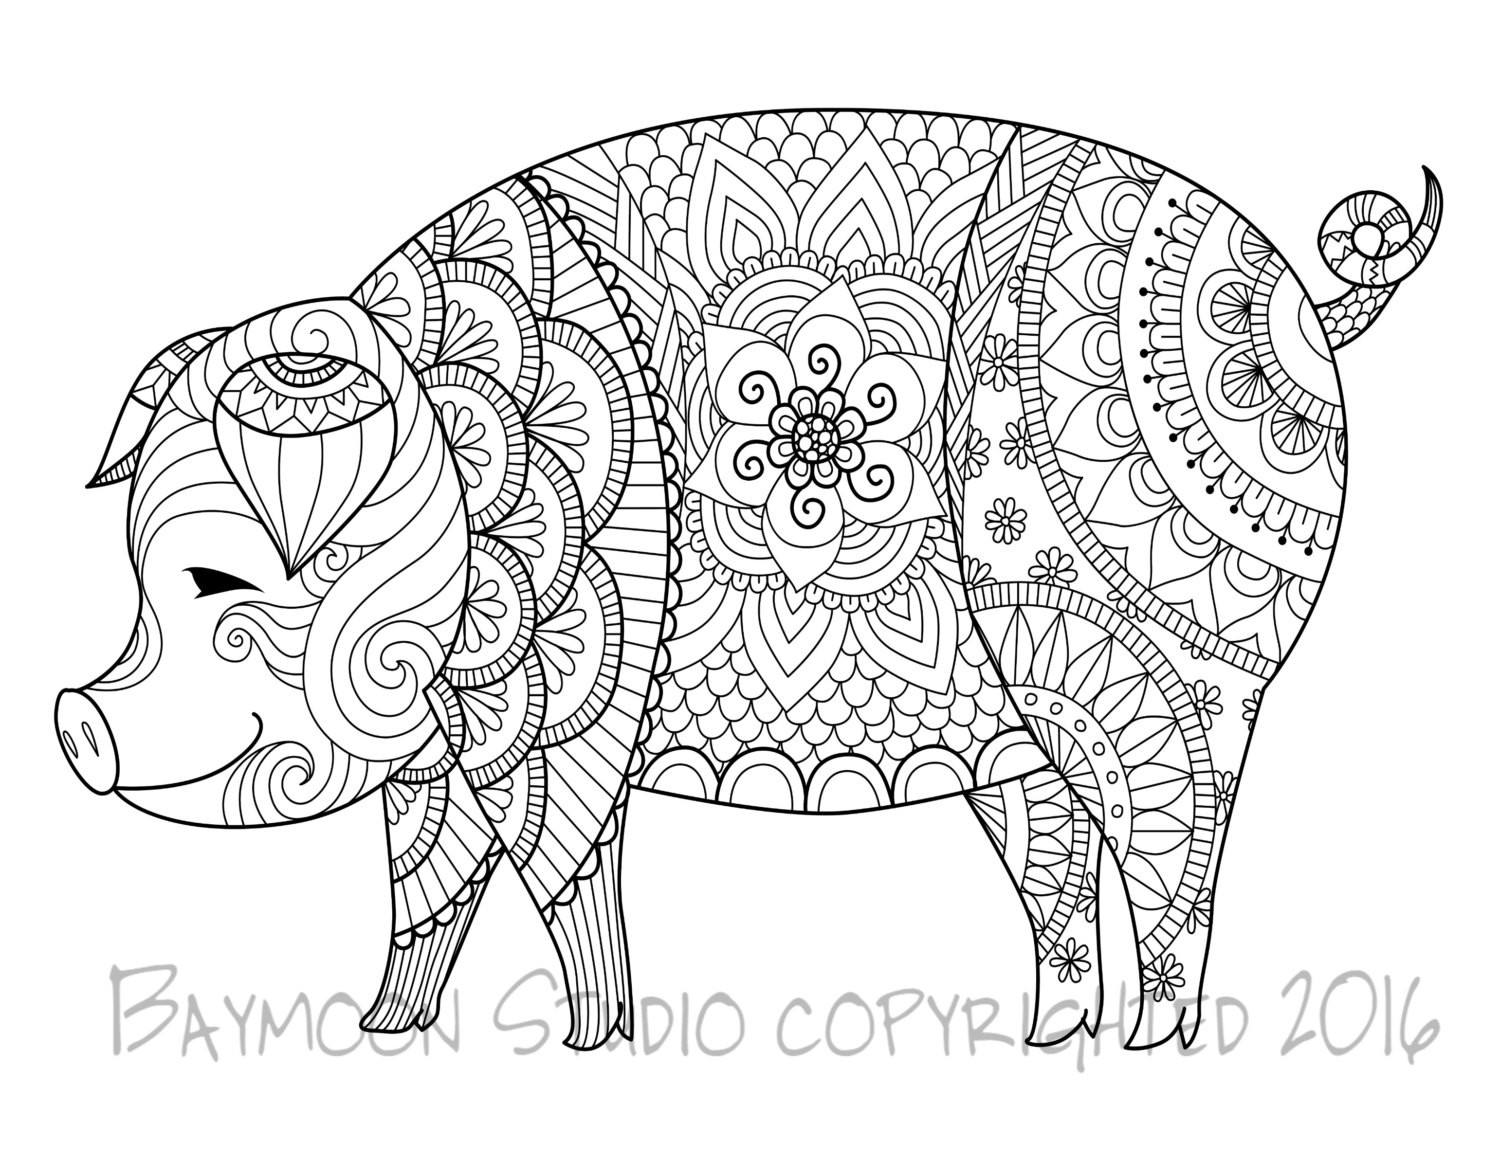 Pig Coloring Pages For Adults
 Pig Coloring Page Printable Coloring Pages Adult by